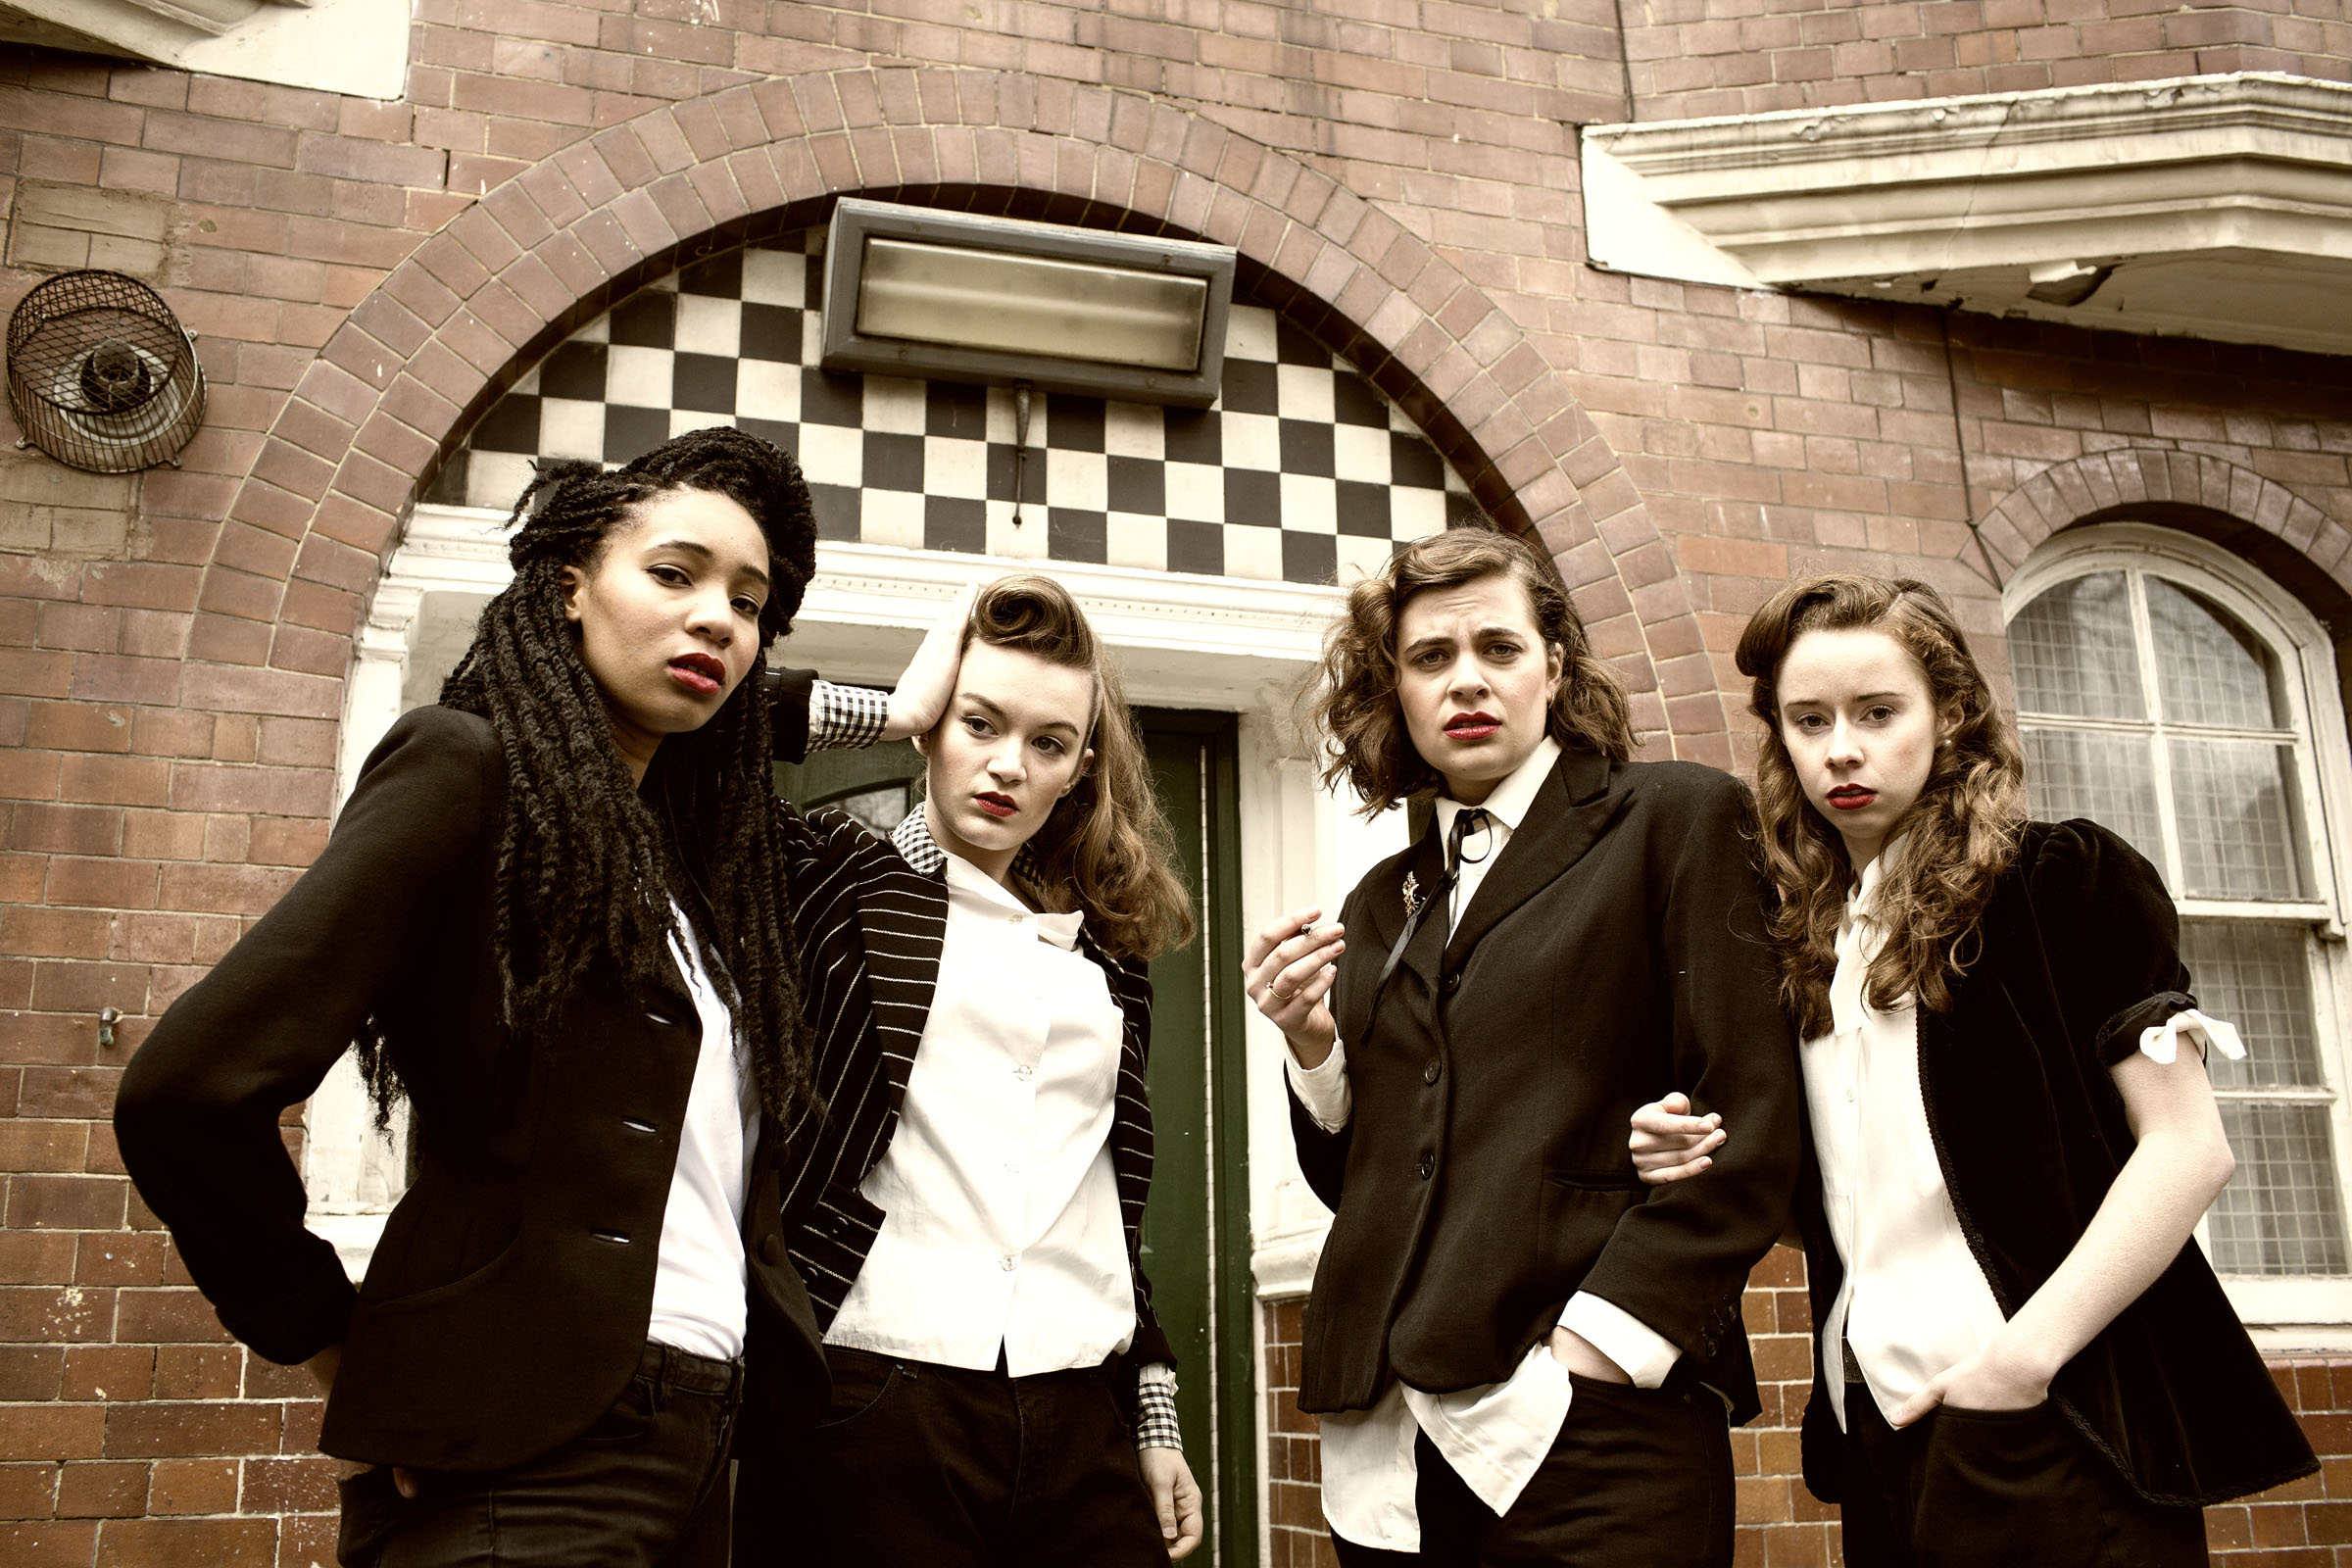 Teddy Girls - Romeo and Juliet promotional photo